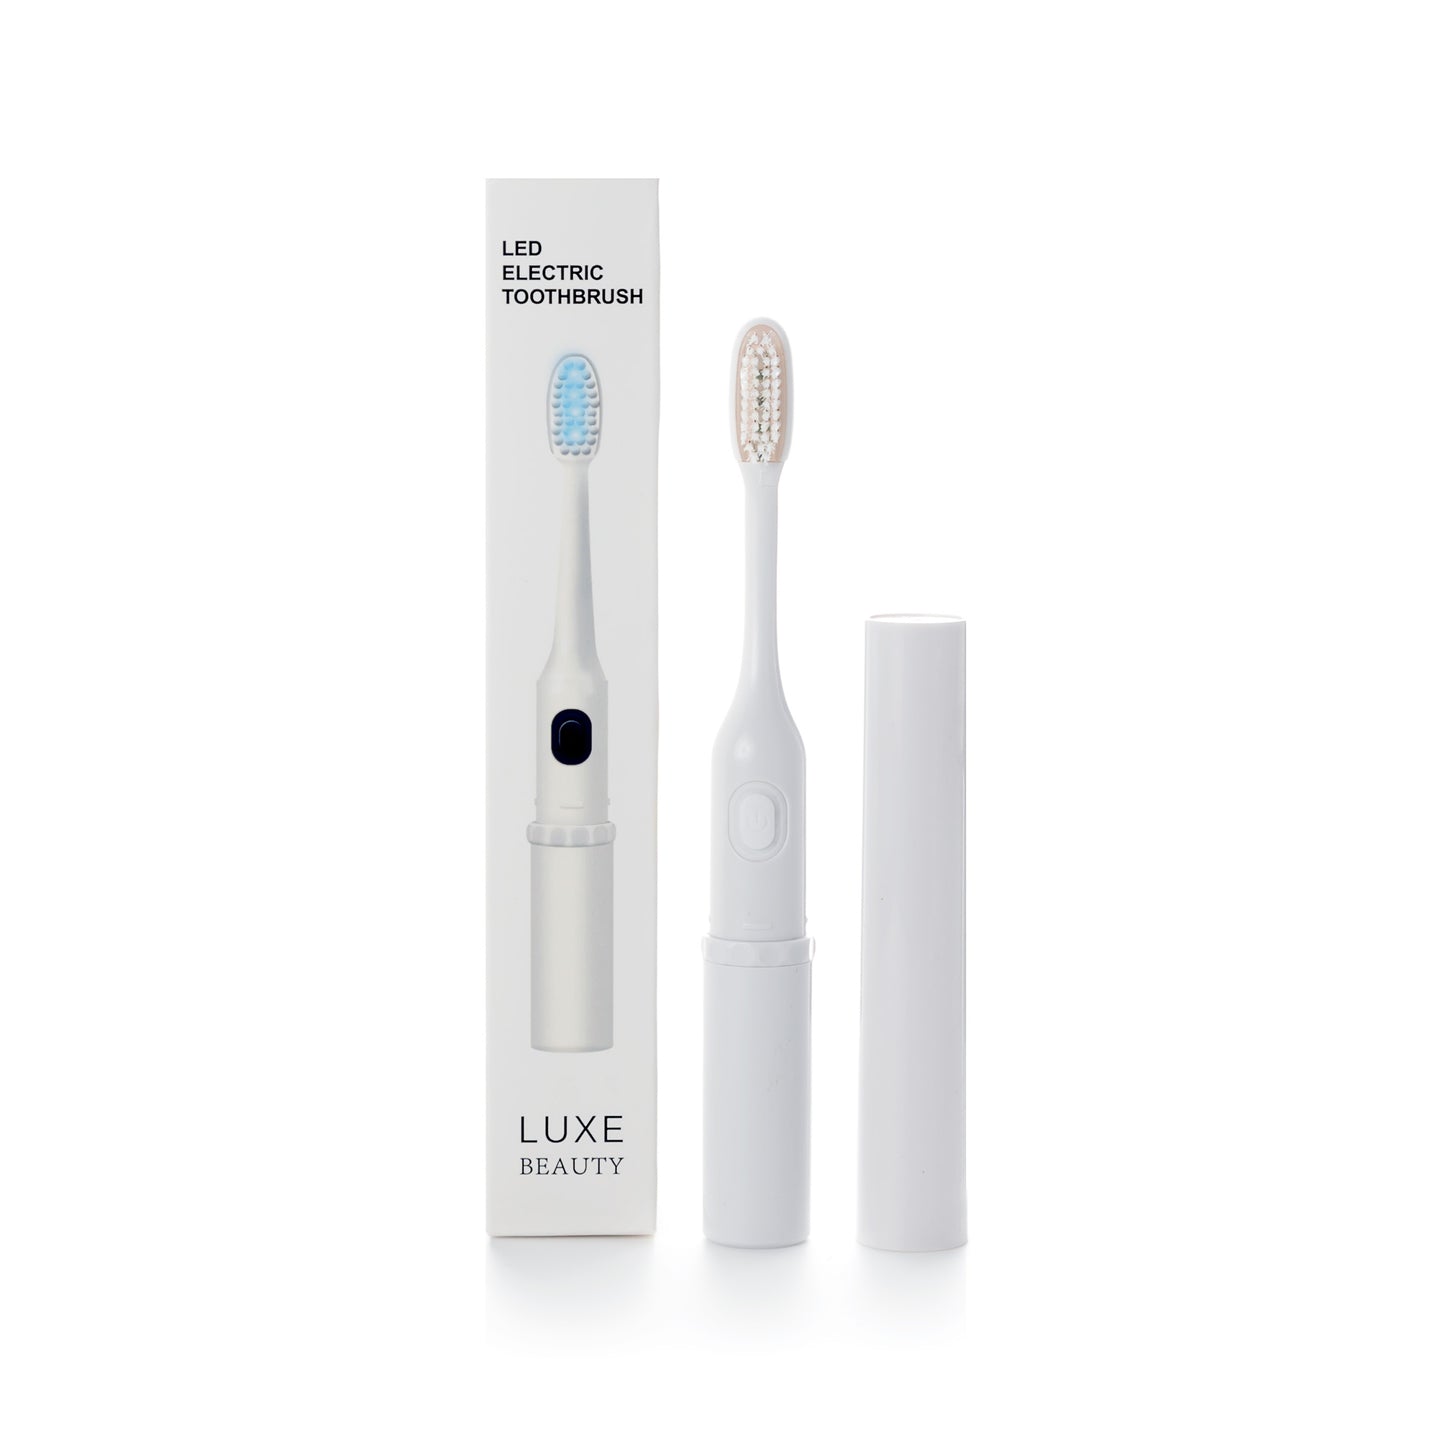 Luxe Blue Light Electric Toothbrush